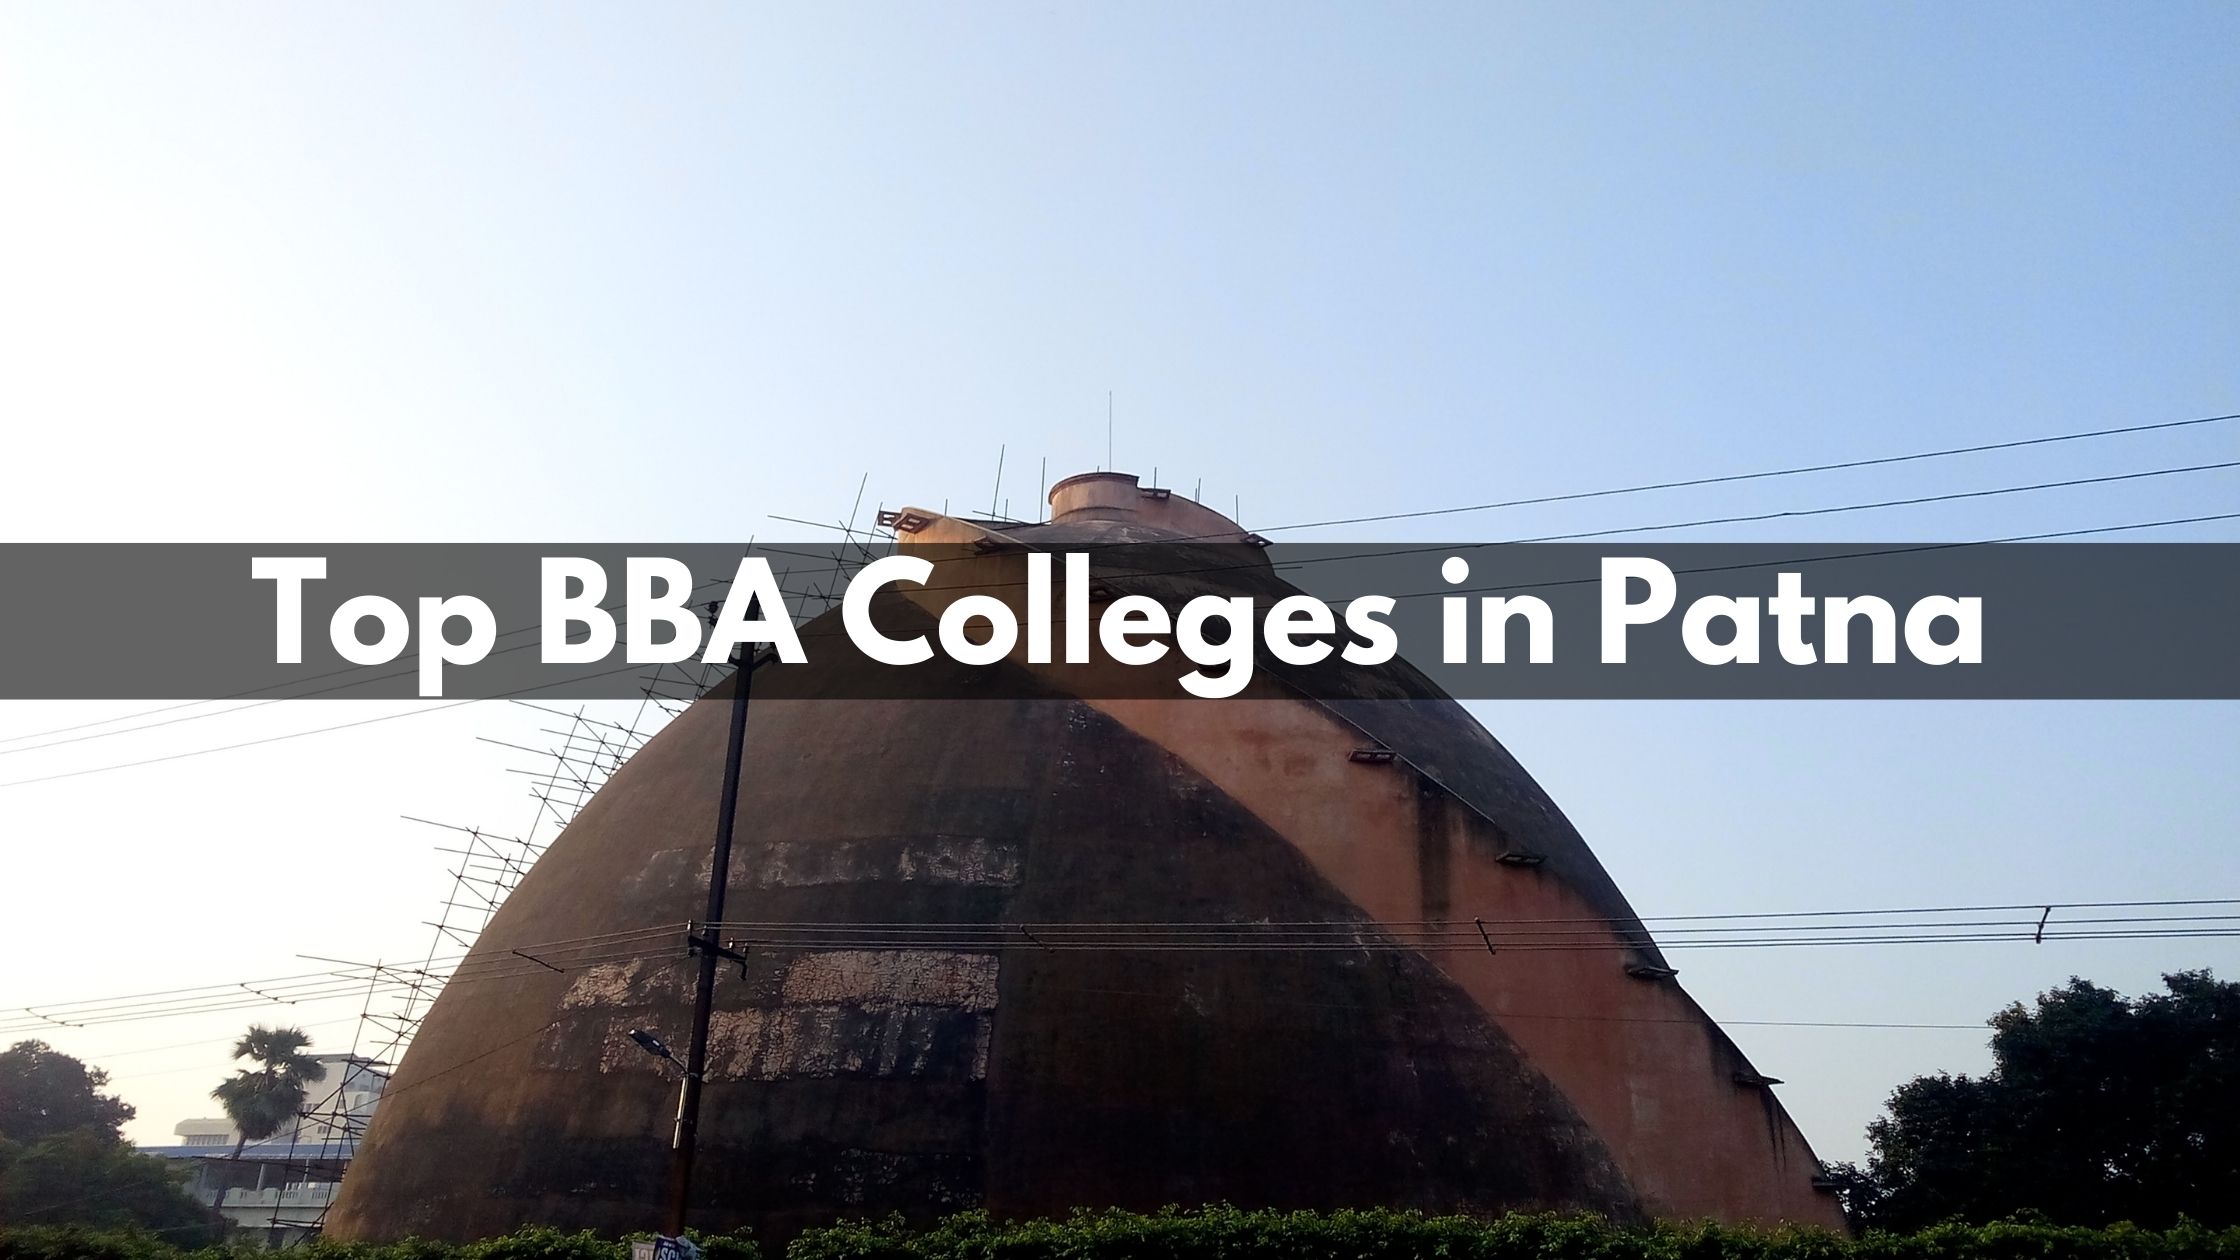 BBA Colleges in Patna